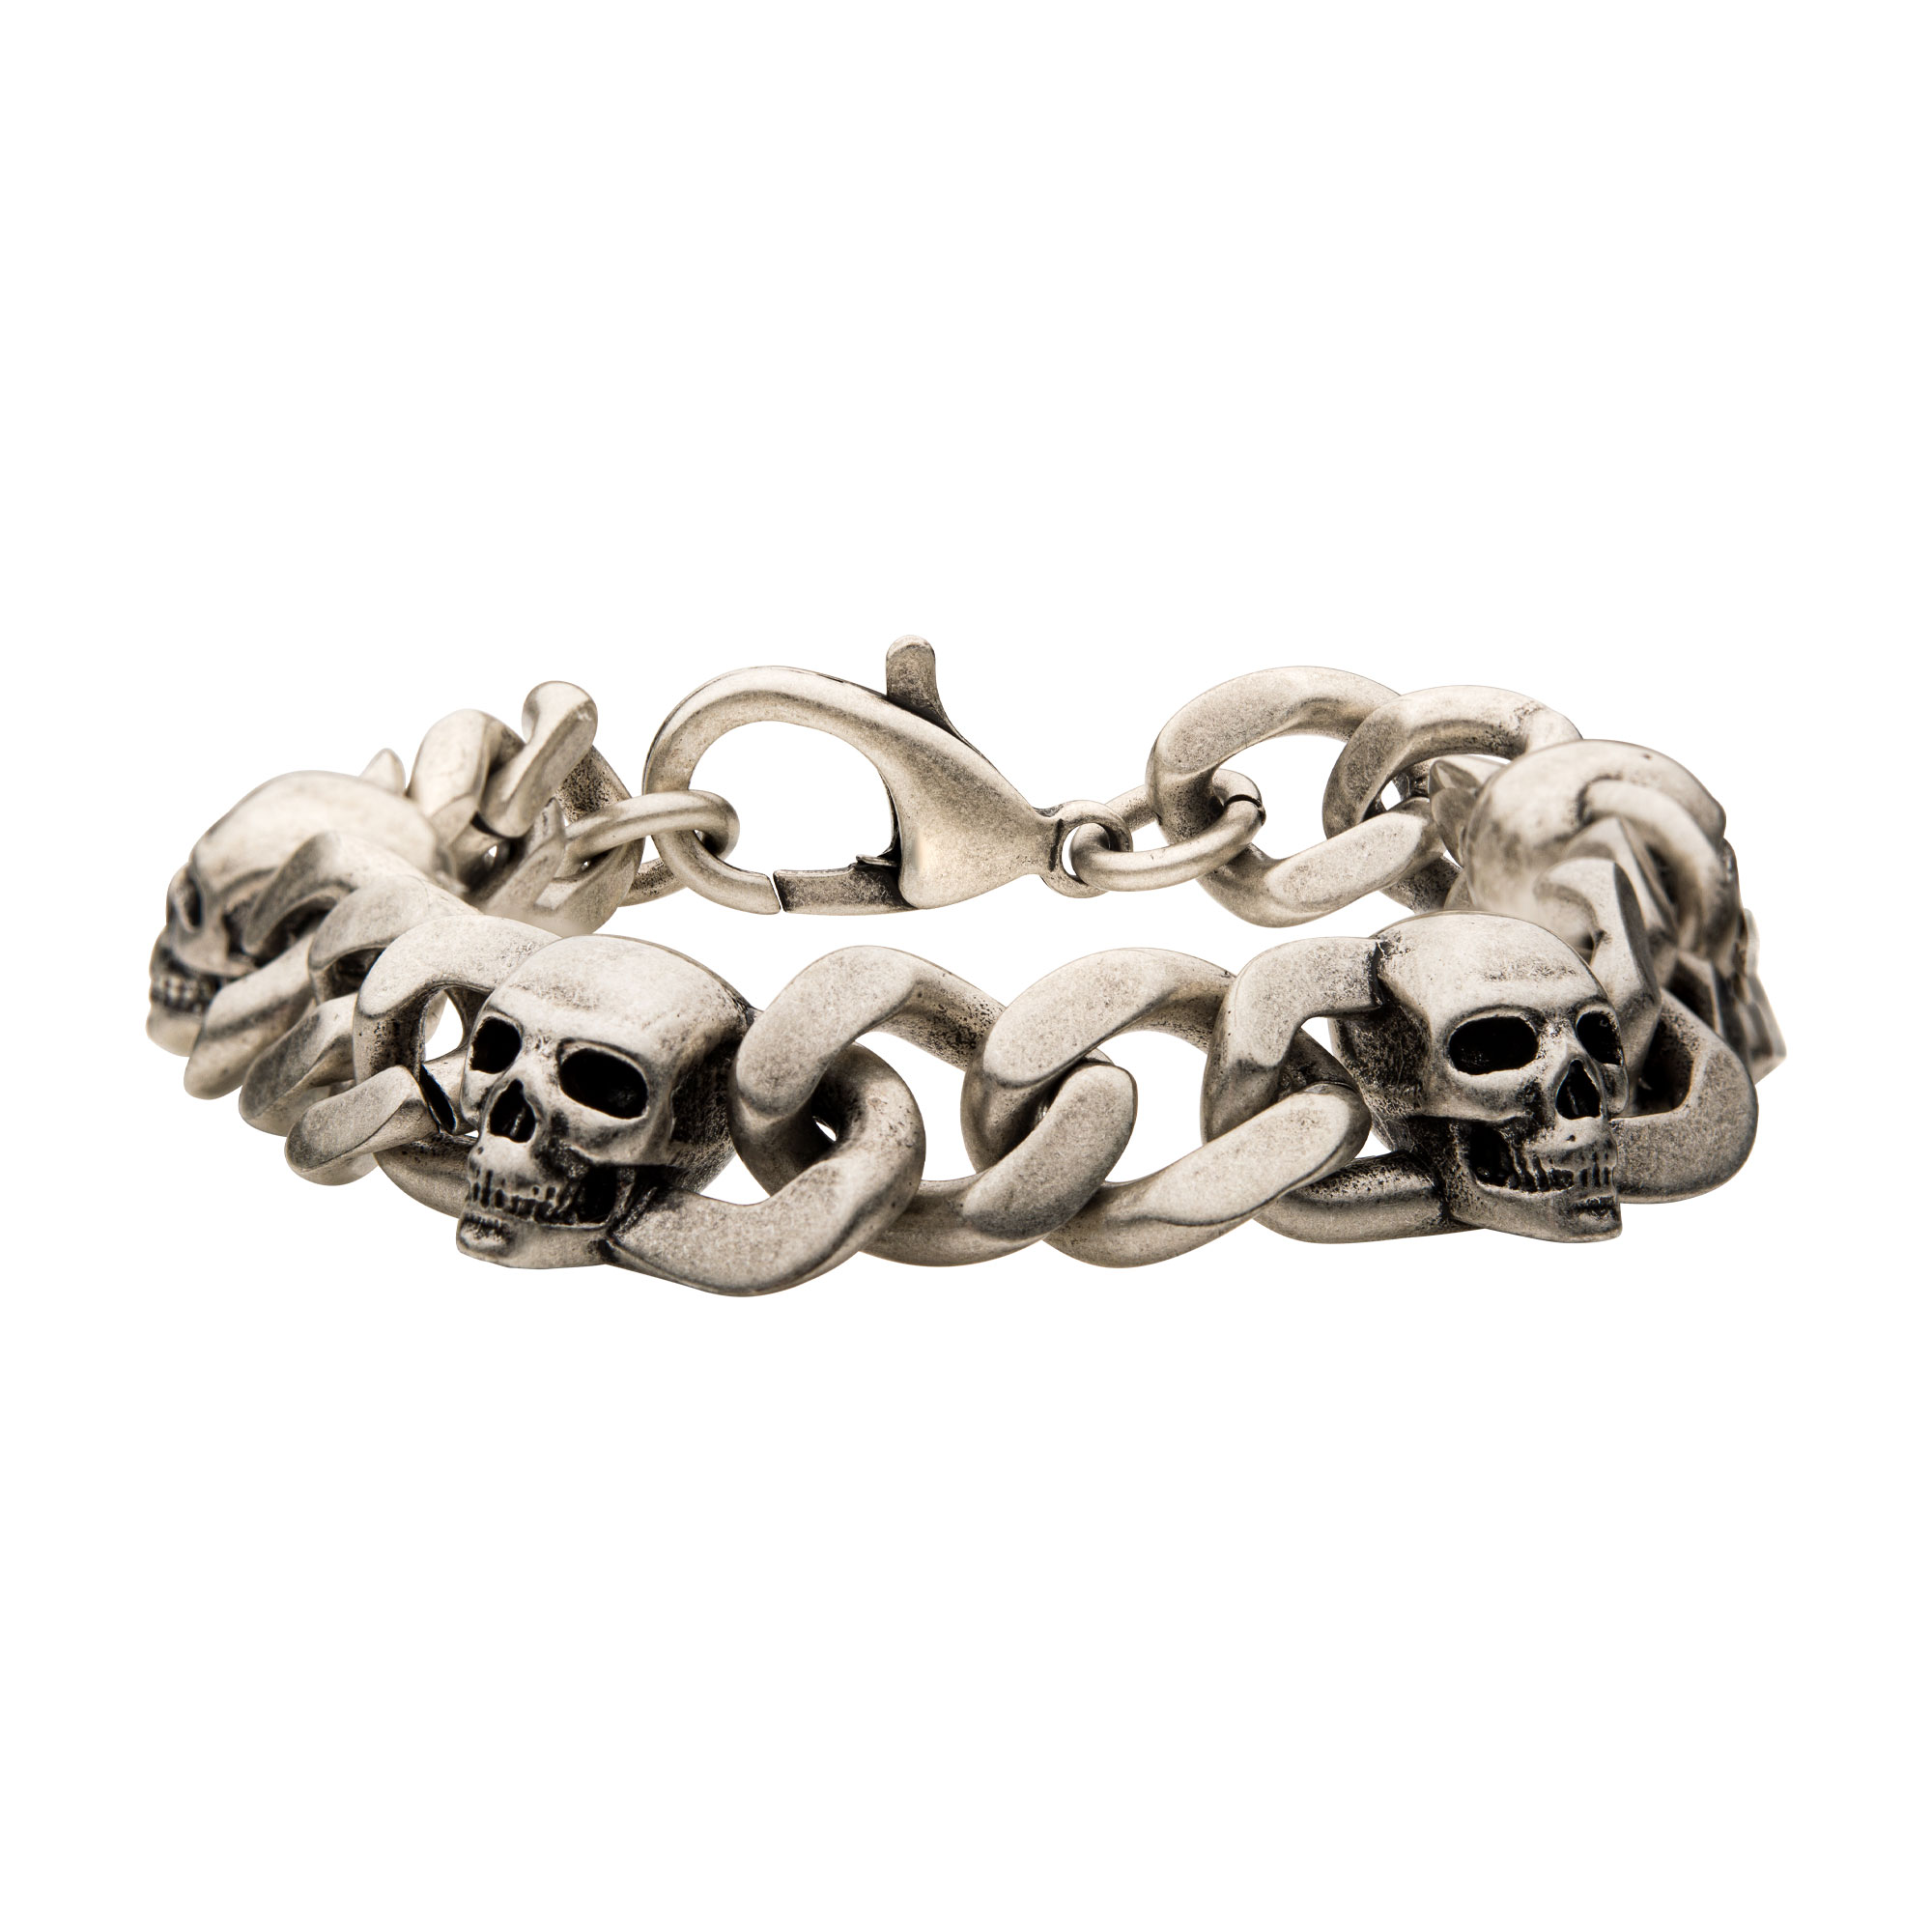 Stainless Steel Silver Plated with Skull Design Chunky Chain Bracelet Glatz Jewelry Aliquippa, PA